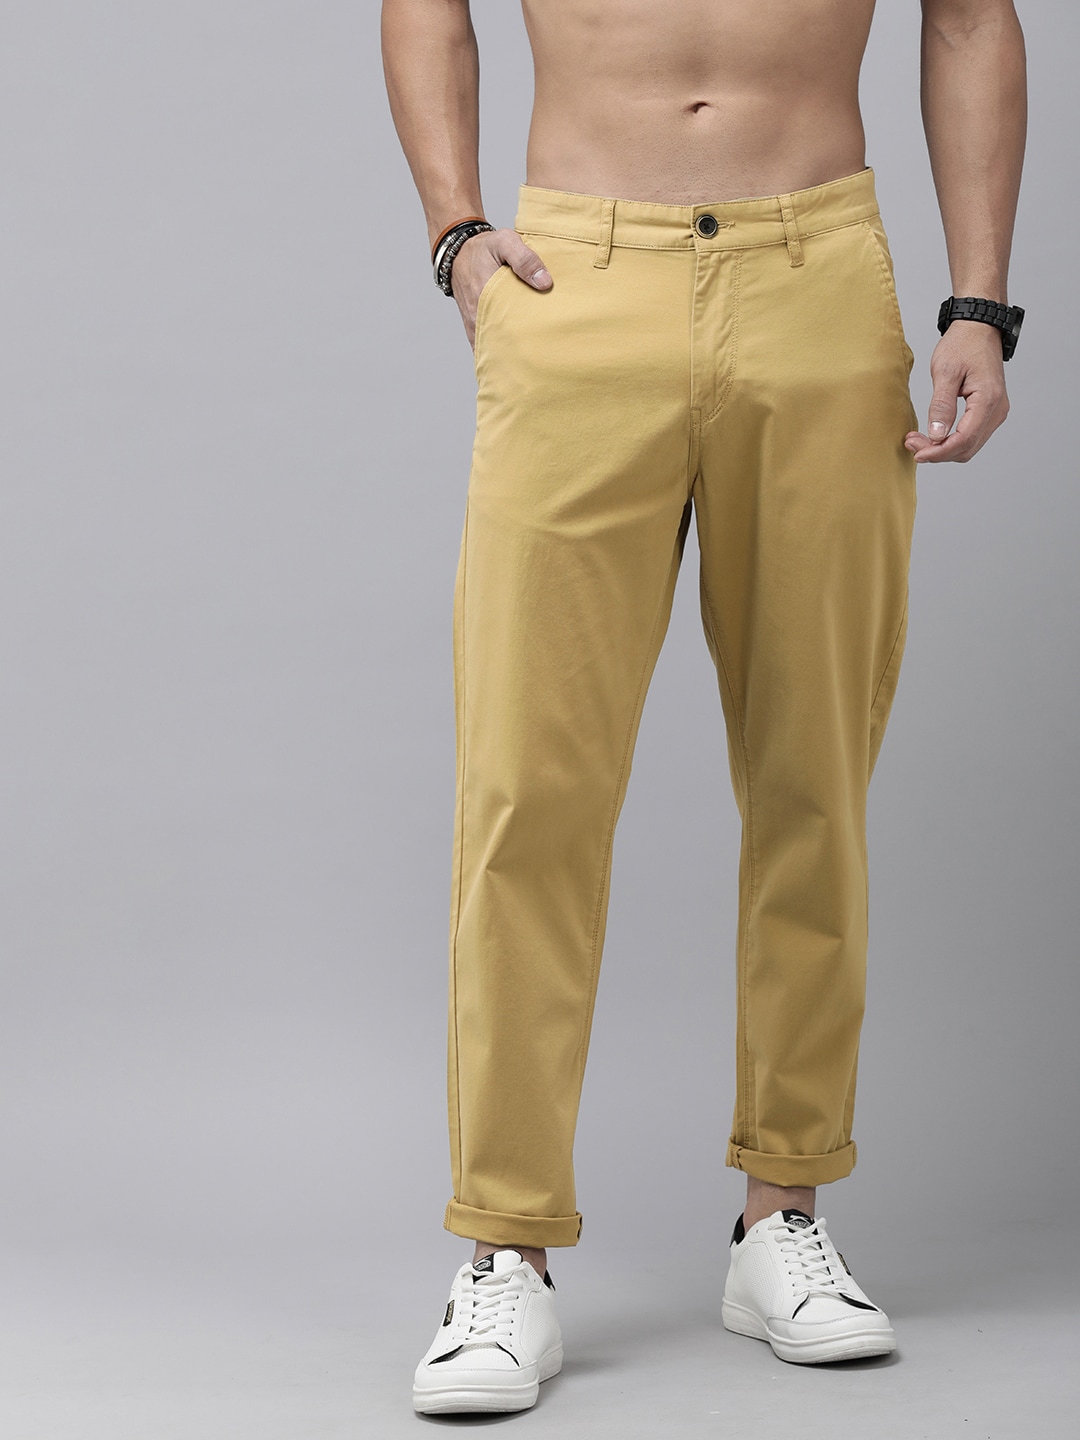 The Roadster Lifestyle Co. Men Chinos Trousers